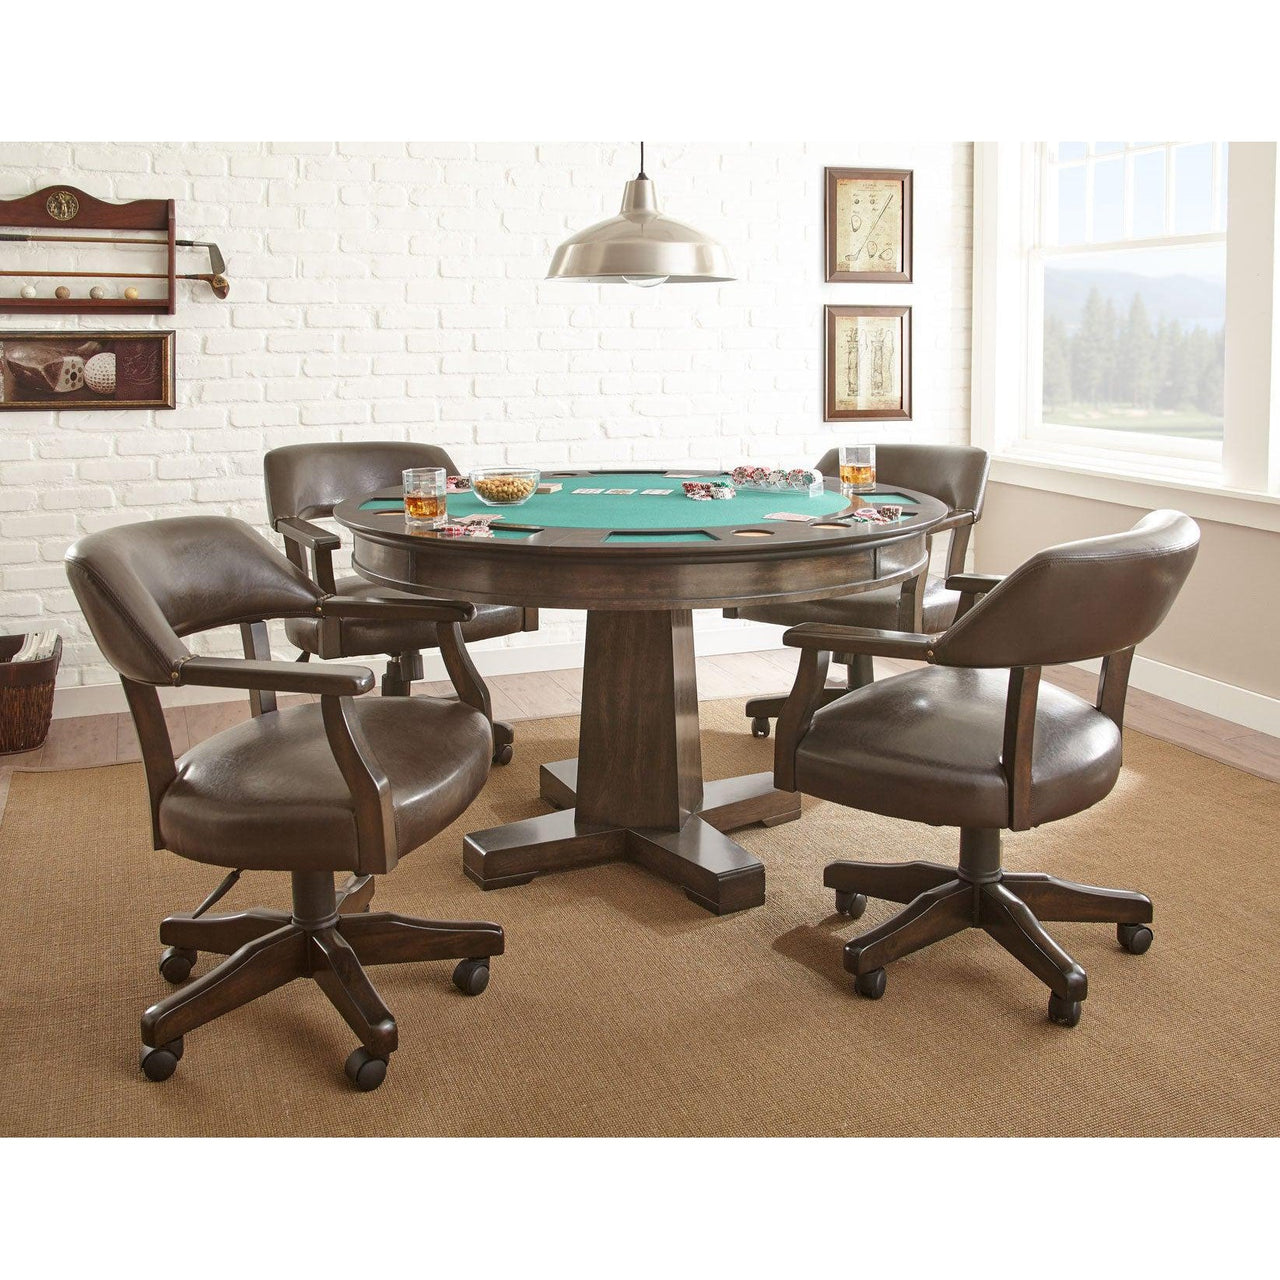 Convertible Poker Table Set Ruby with matching Chairs by Steve Silver-AMERICANA-POKER-TABLES